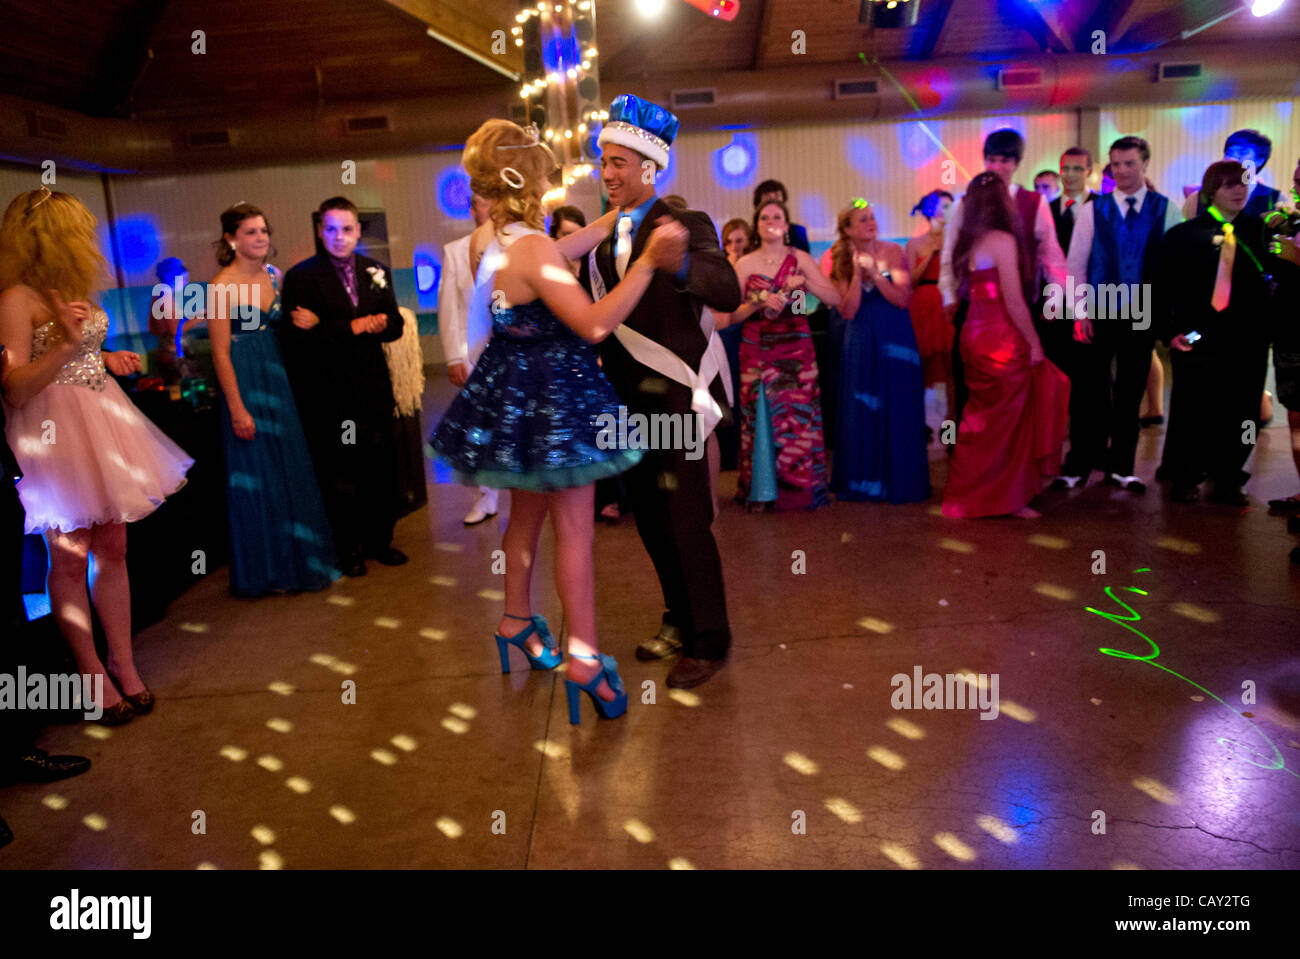 May 5, 2012 - Roseburg, Oregon, U.S - The King and Queen of the Glide (Ore.) High School prom share their first dance as other students watch during their prom in a building at the Douglas County Fairgrounds in Roseburg. The rural school in southwestern Oregon has about 300 students. (Credit Image:  Stock Photo